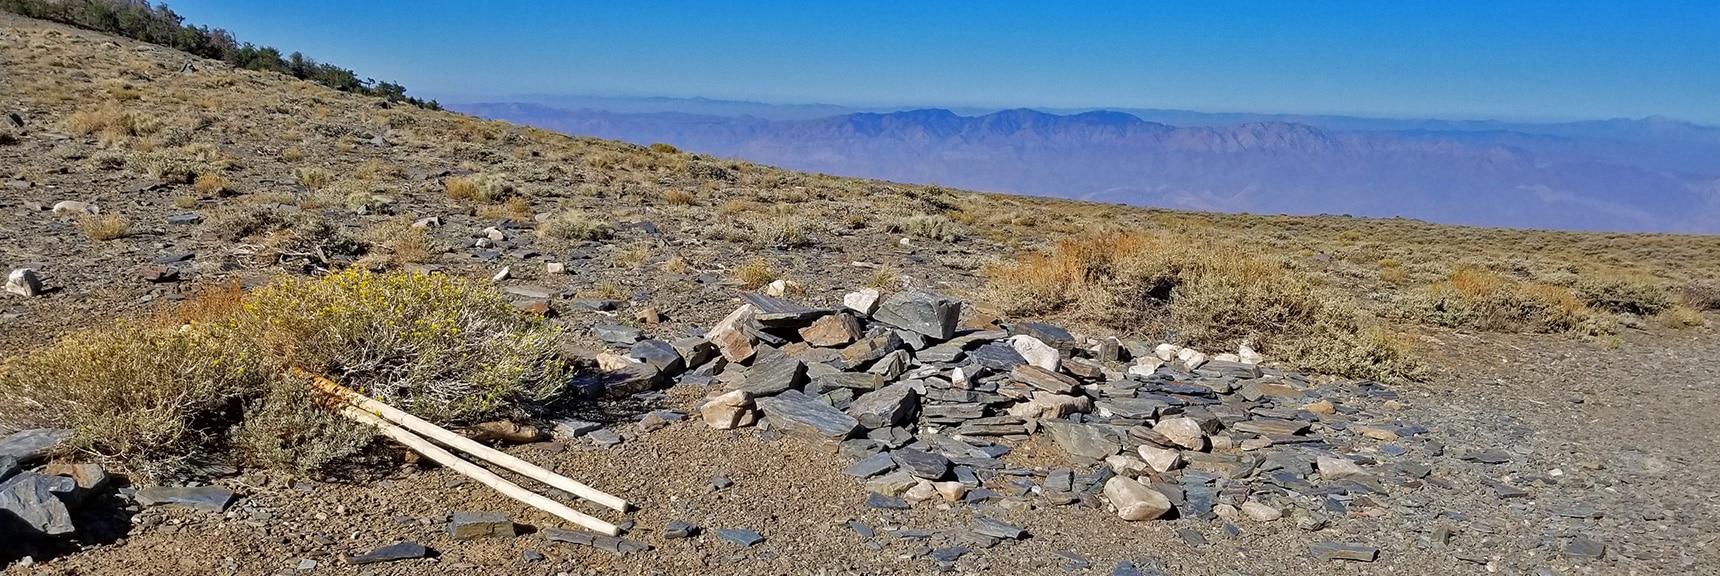 Arrival on the Upper Spine of the Panamint Range, Western Views Open Up | Telescope Peak Summit from Wildrose Charcoal Kilns Parking Area, Panamint Mountains, Death Valley National Park, California